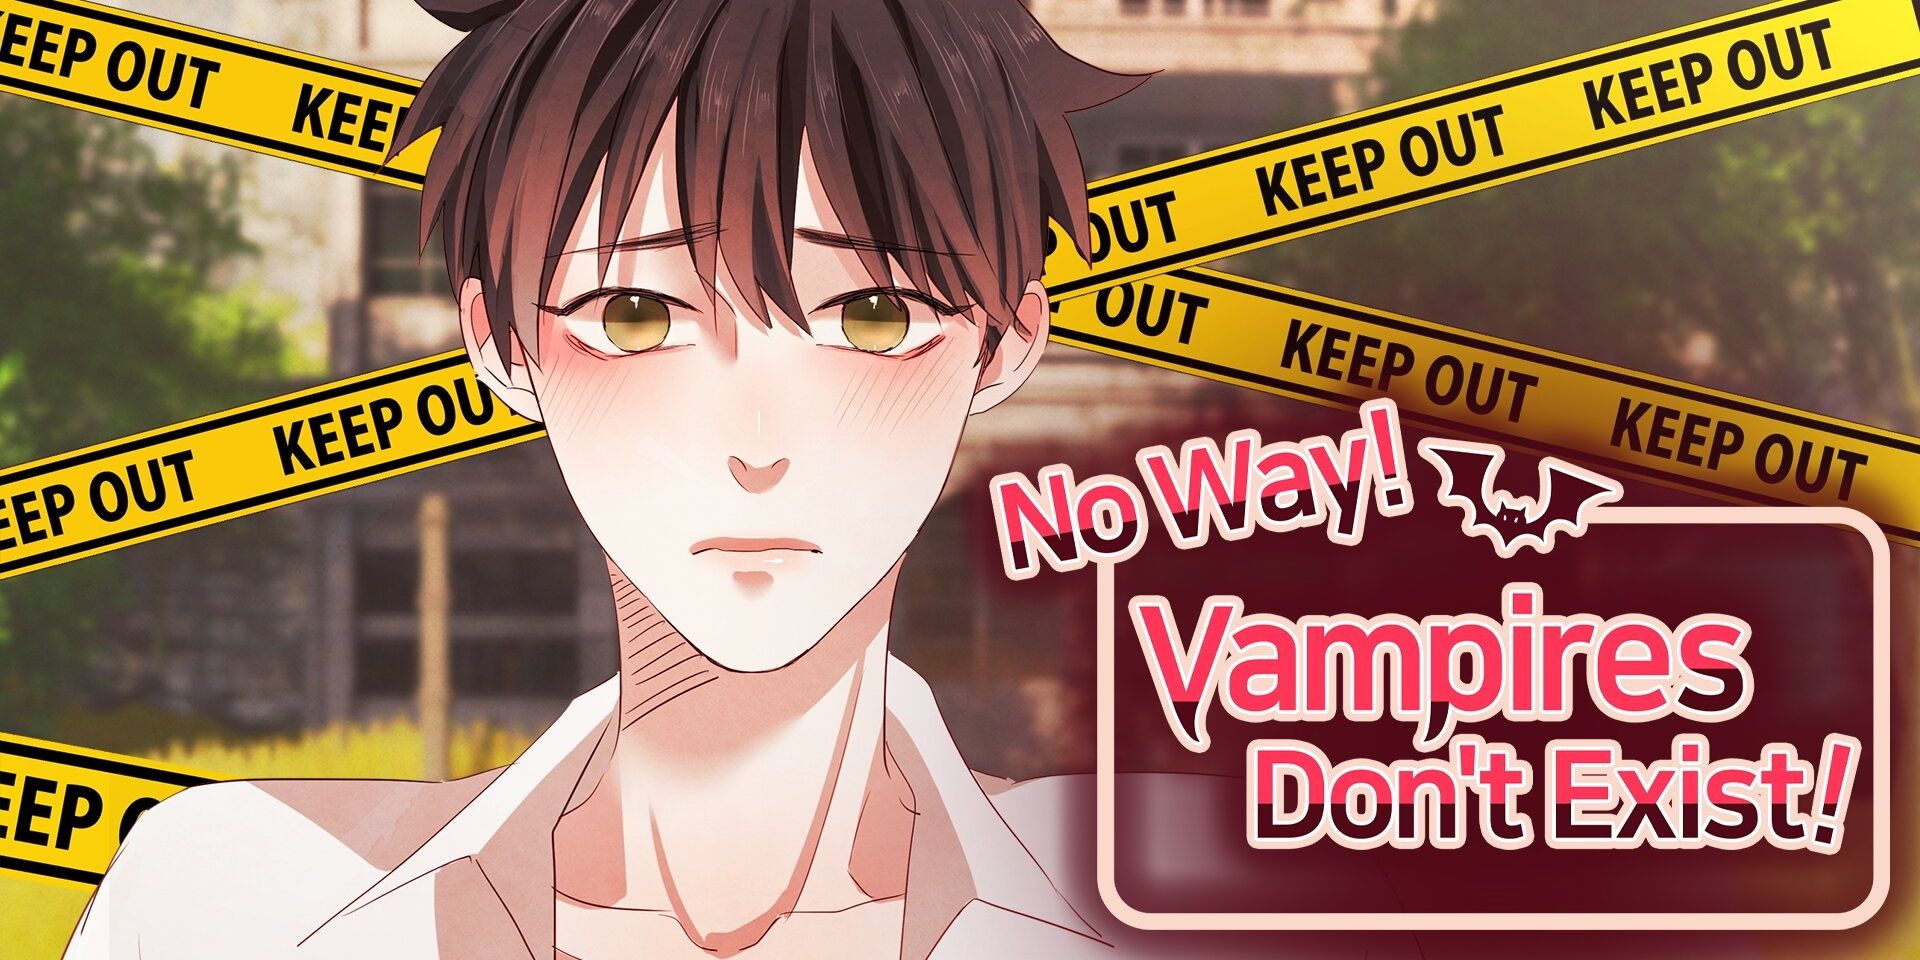 Donha from No Way Vampires Don't Exist looking concerned with a building and keep out tape in the background